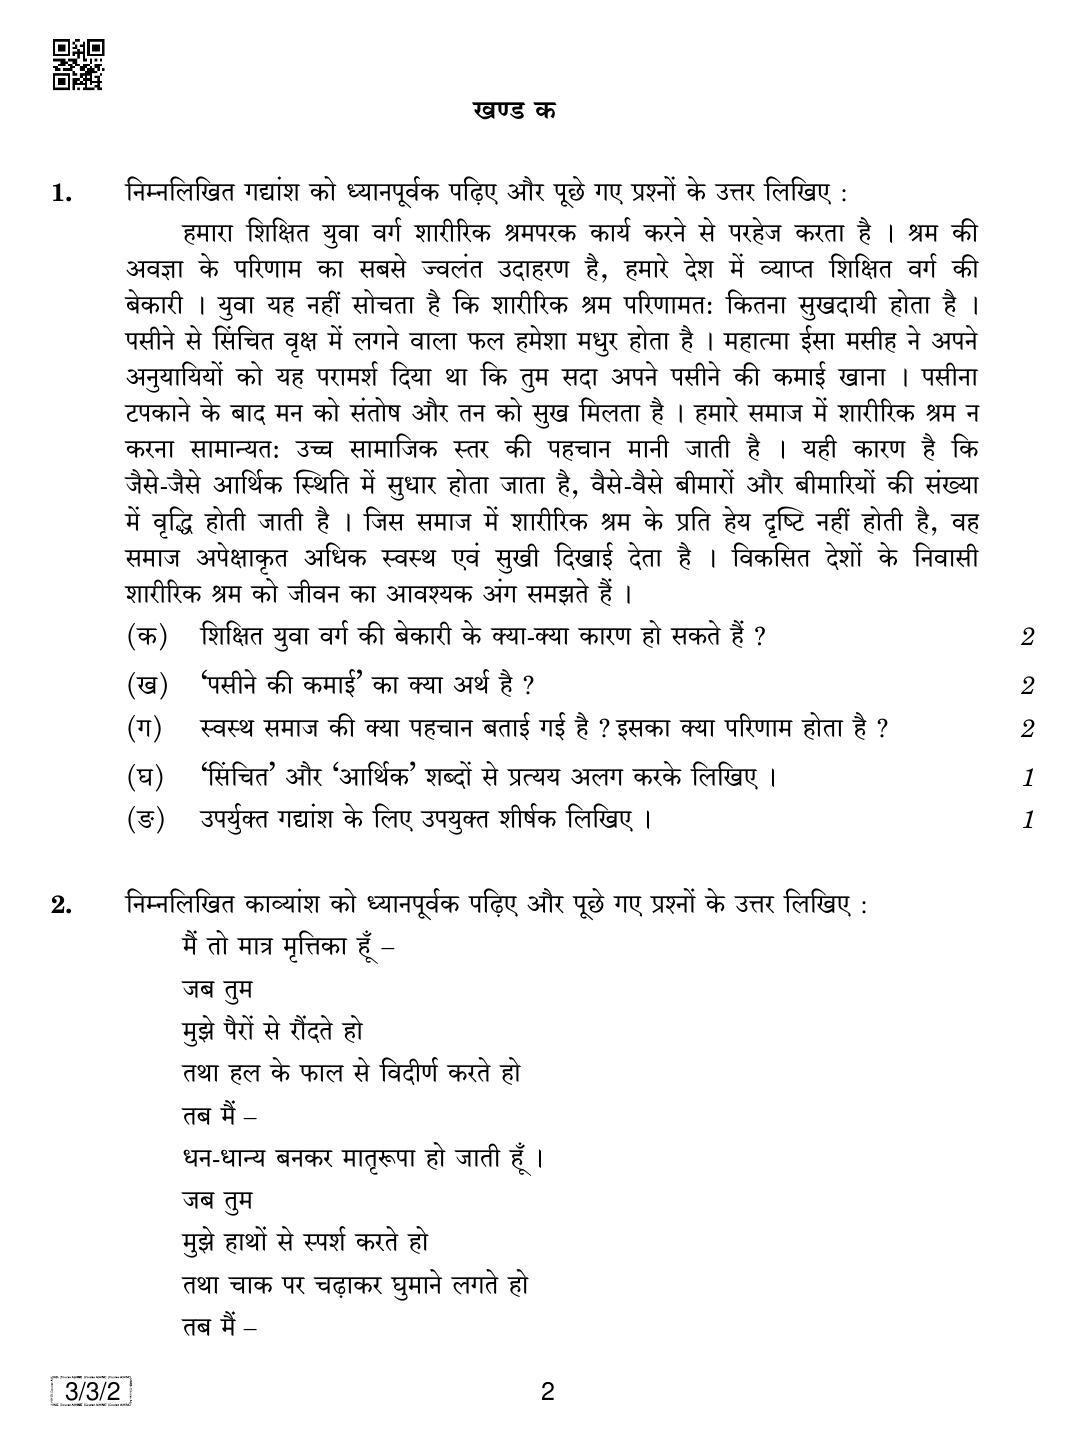 CBSE Class 10 3-3-2 HINDI COURSE- A 2019 Question Paper - Page 2